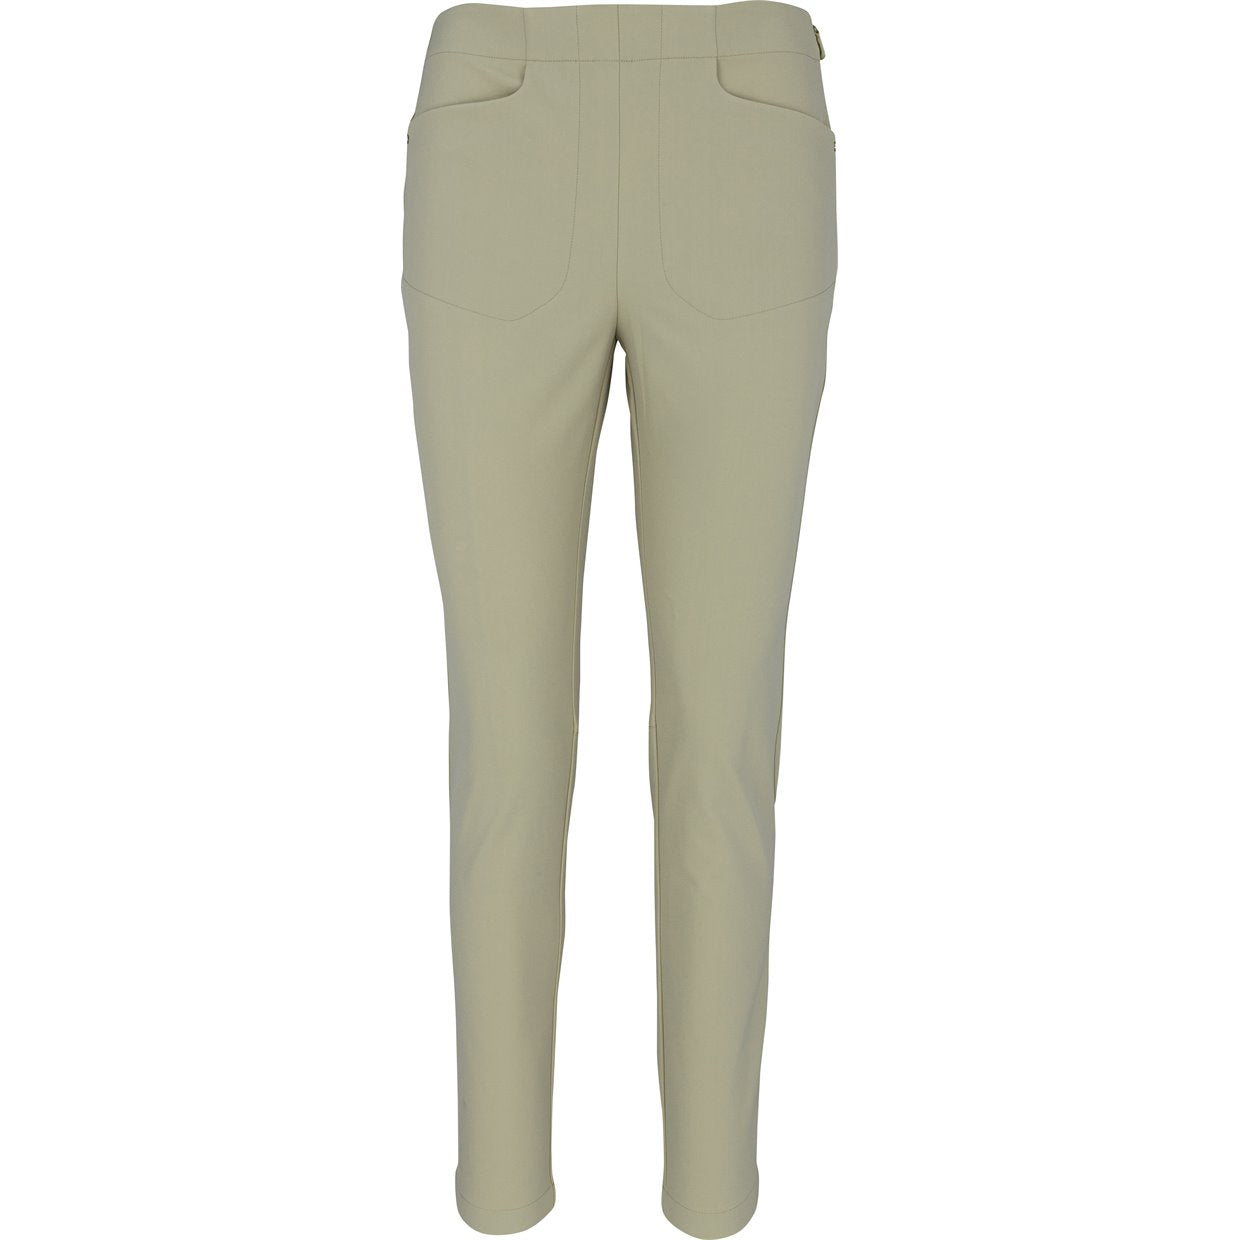 Women's Golf Pants Stretch Straight Lightweight Breathable Twill